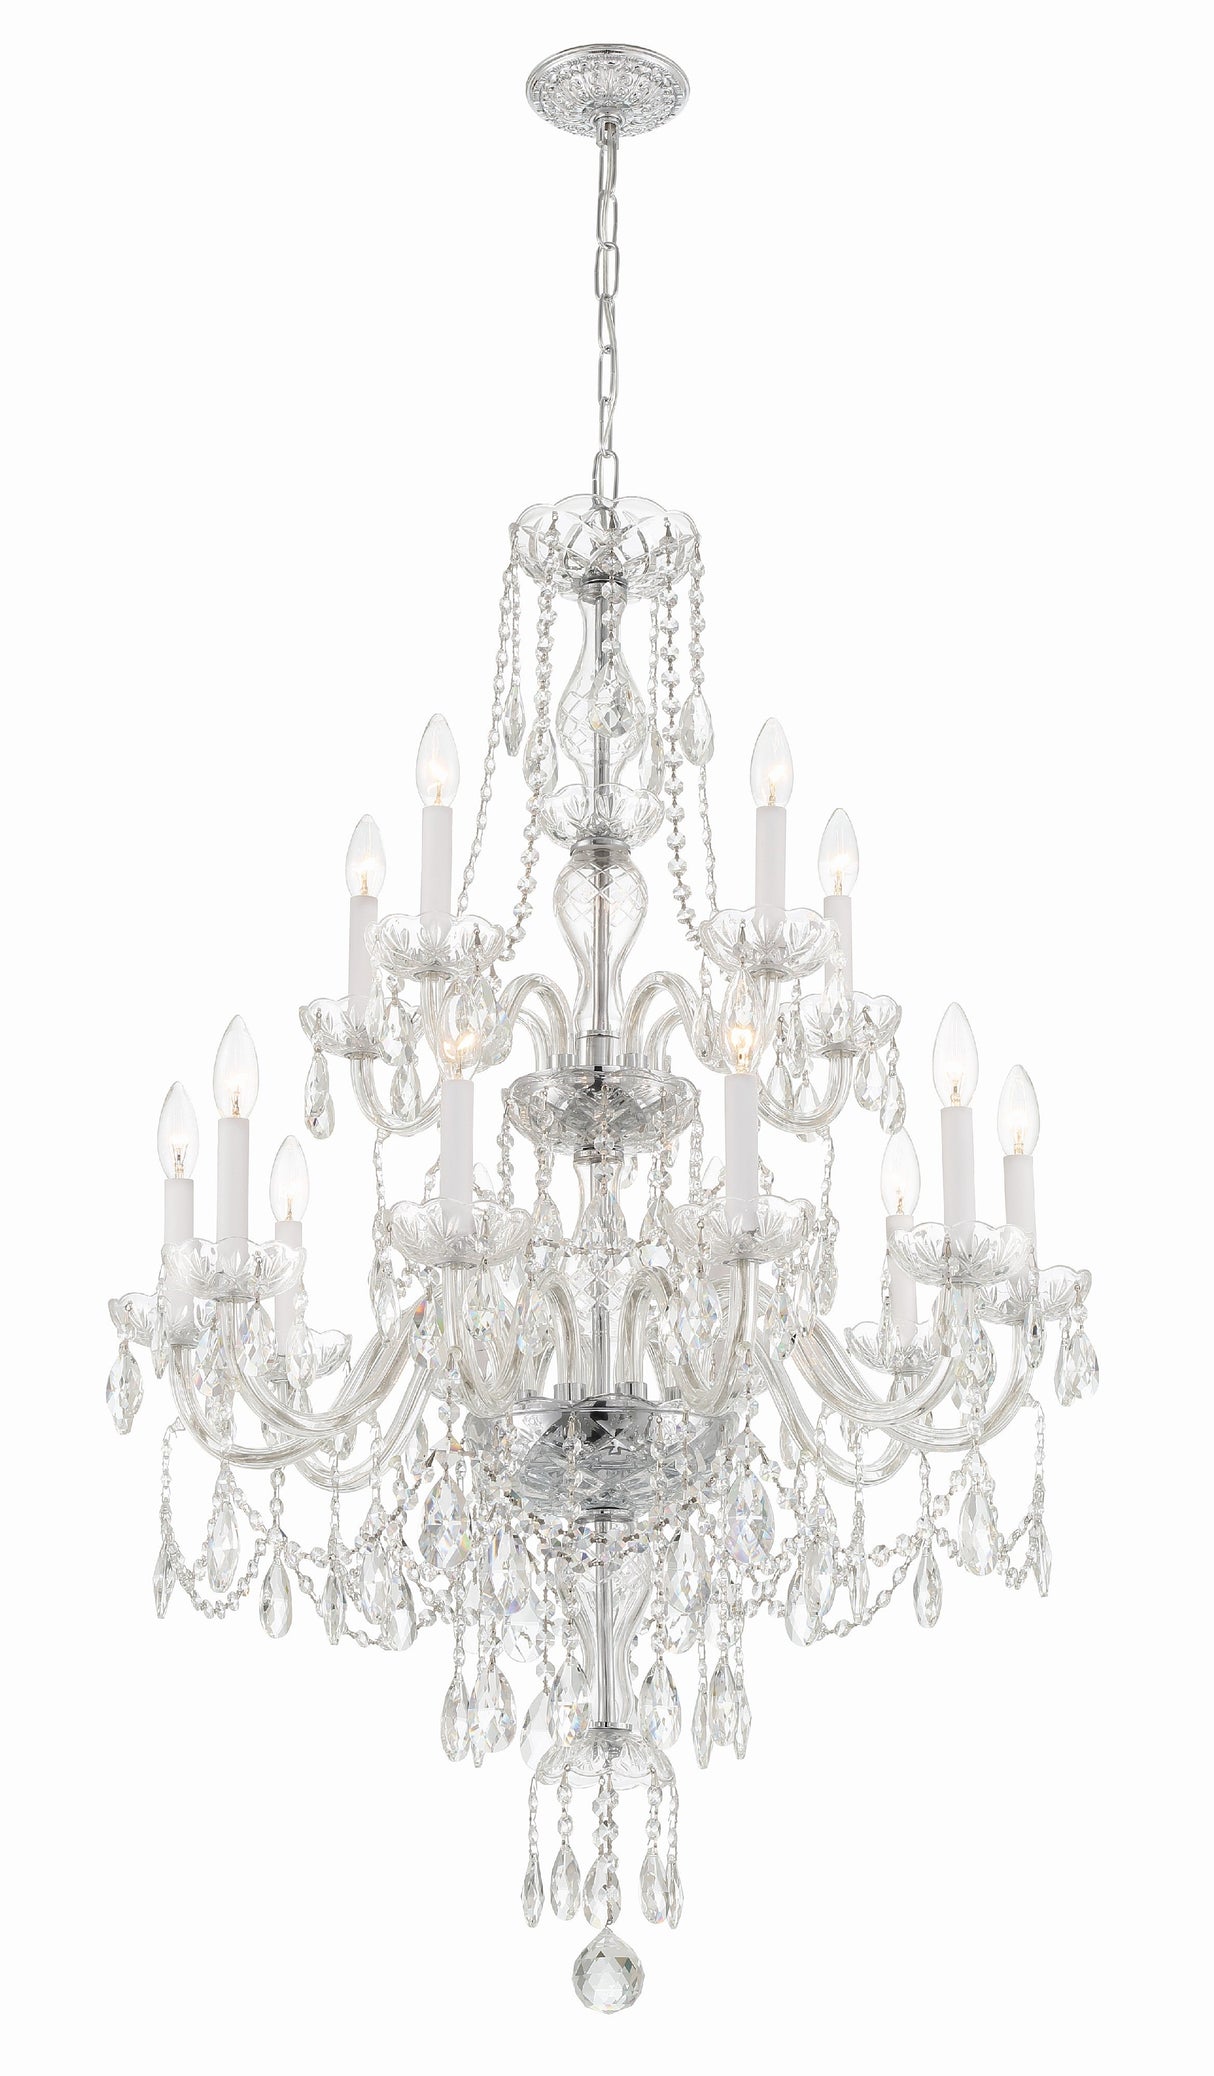 Traditional Crystal 15 Light Hand Cut Crystal Polished Chrome Chandelier 1155-CH-CL-MWP